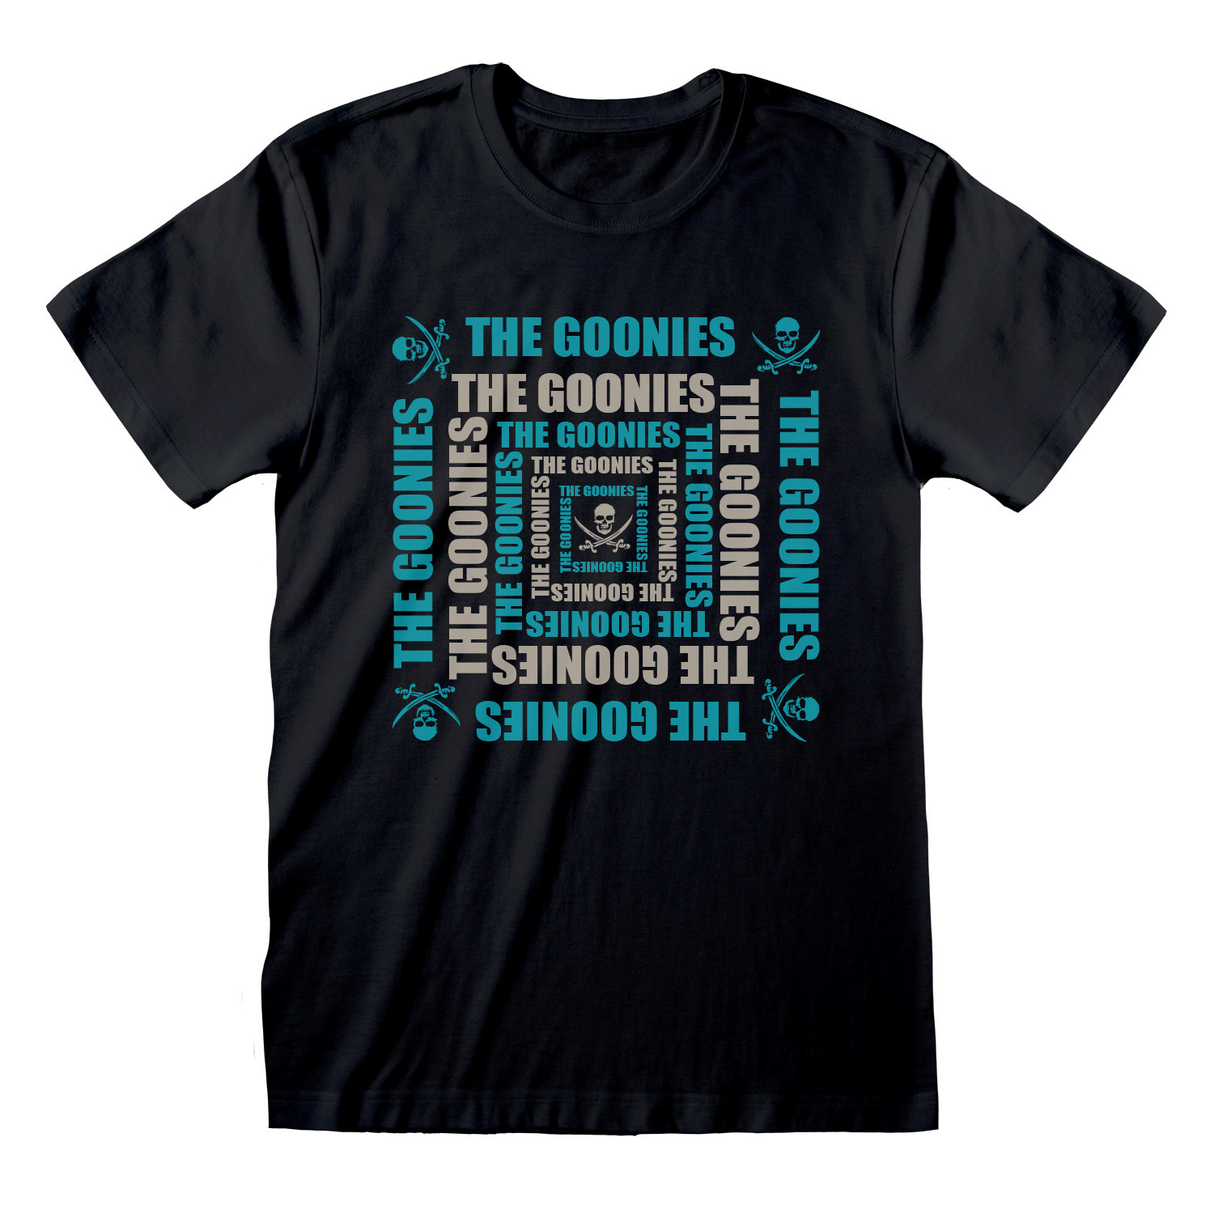 The Goonies Square Name T-Shirt